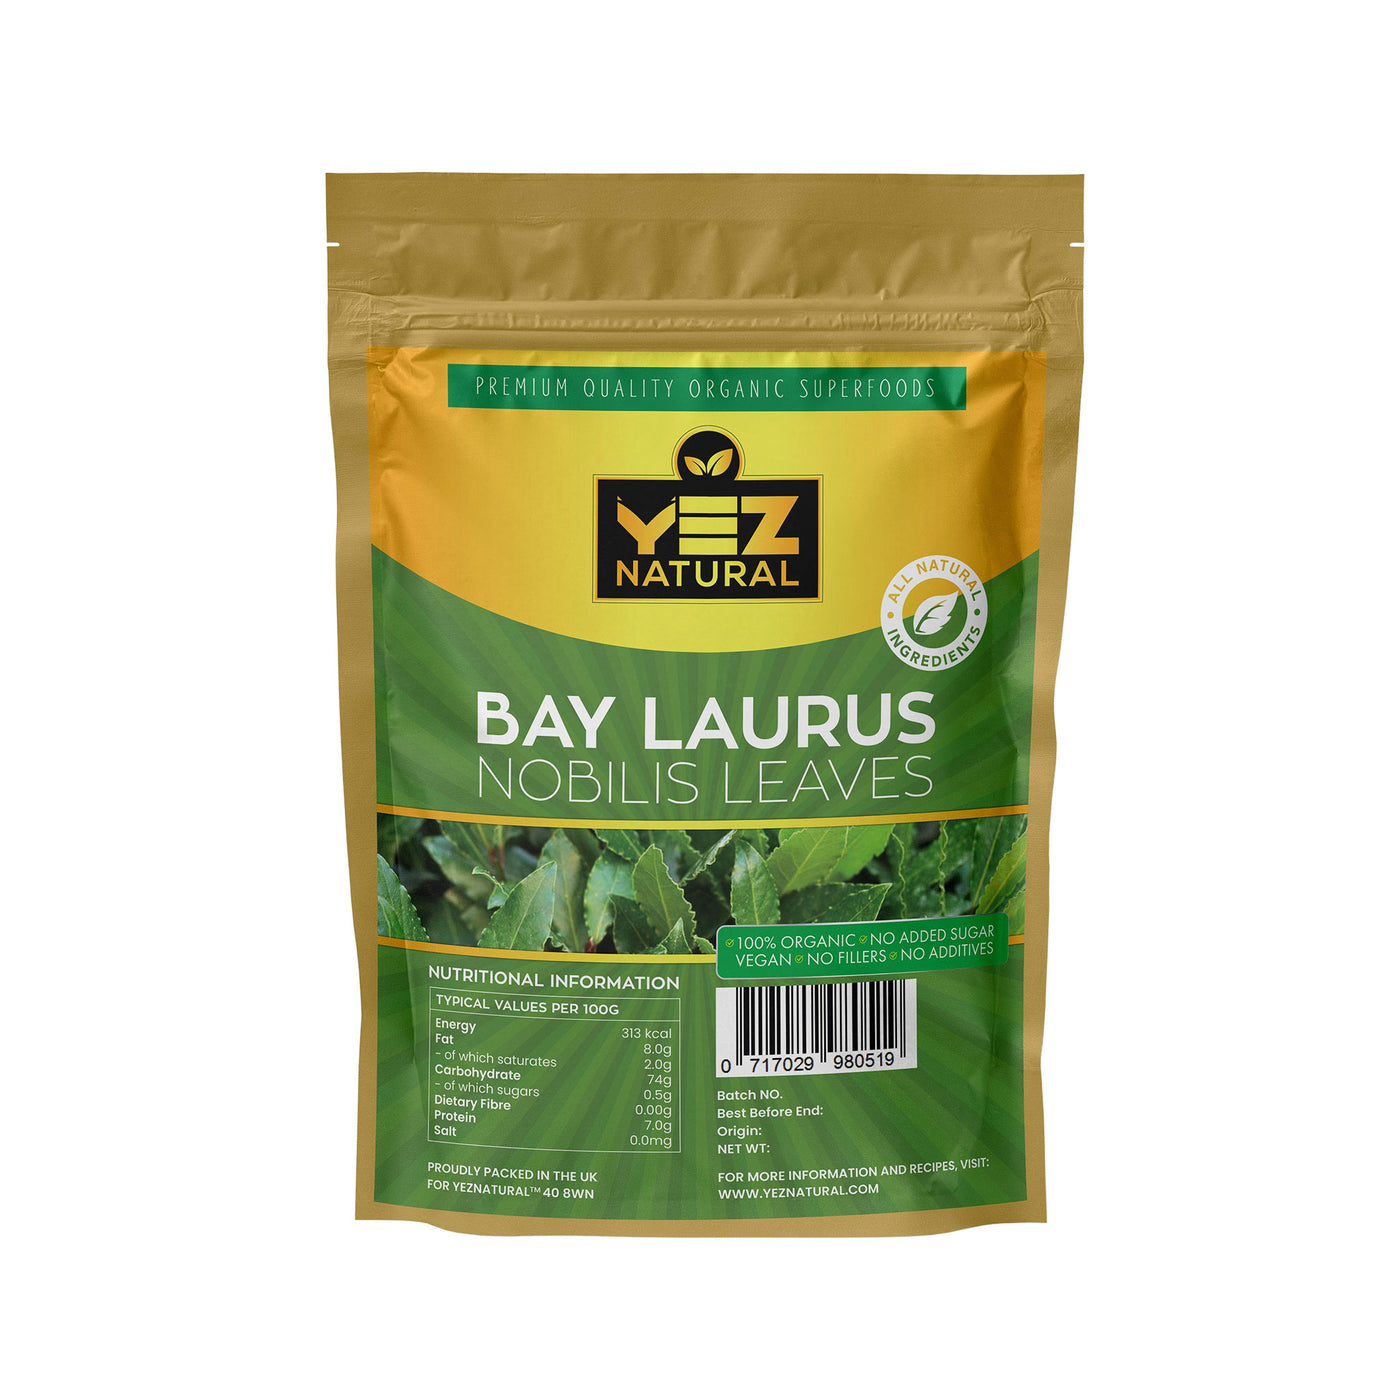 The Bay leaves are aromatic leaves commonly used in dishes like soups, meat, seafood, stews, sauces, and vegetables. Bay leaves can be used whole, either fresh or dried. It has a strong spicy flavour & aroma that intensifies when dried.